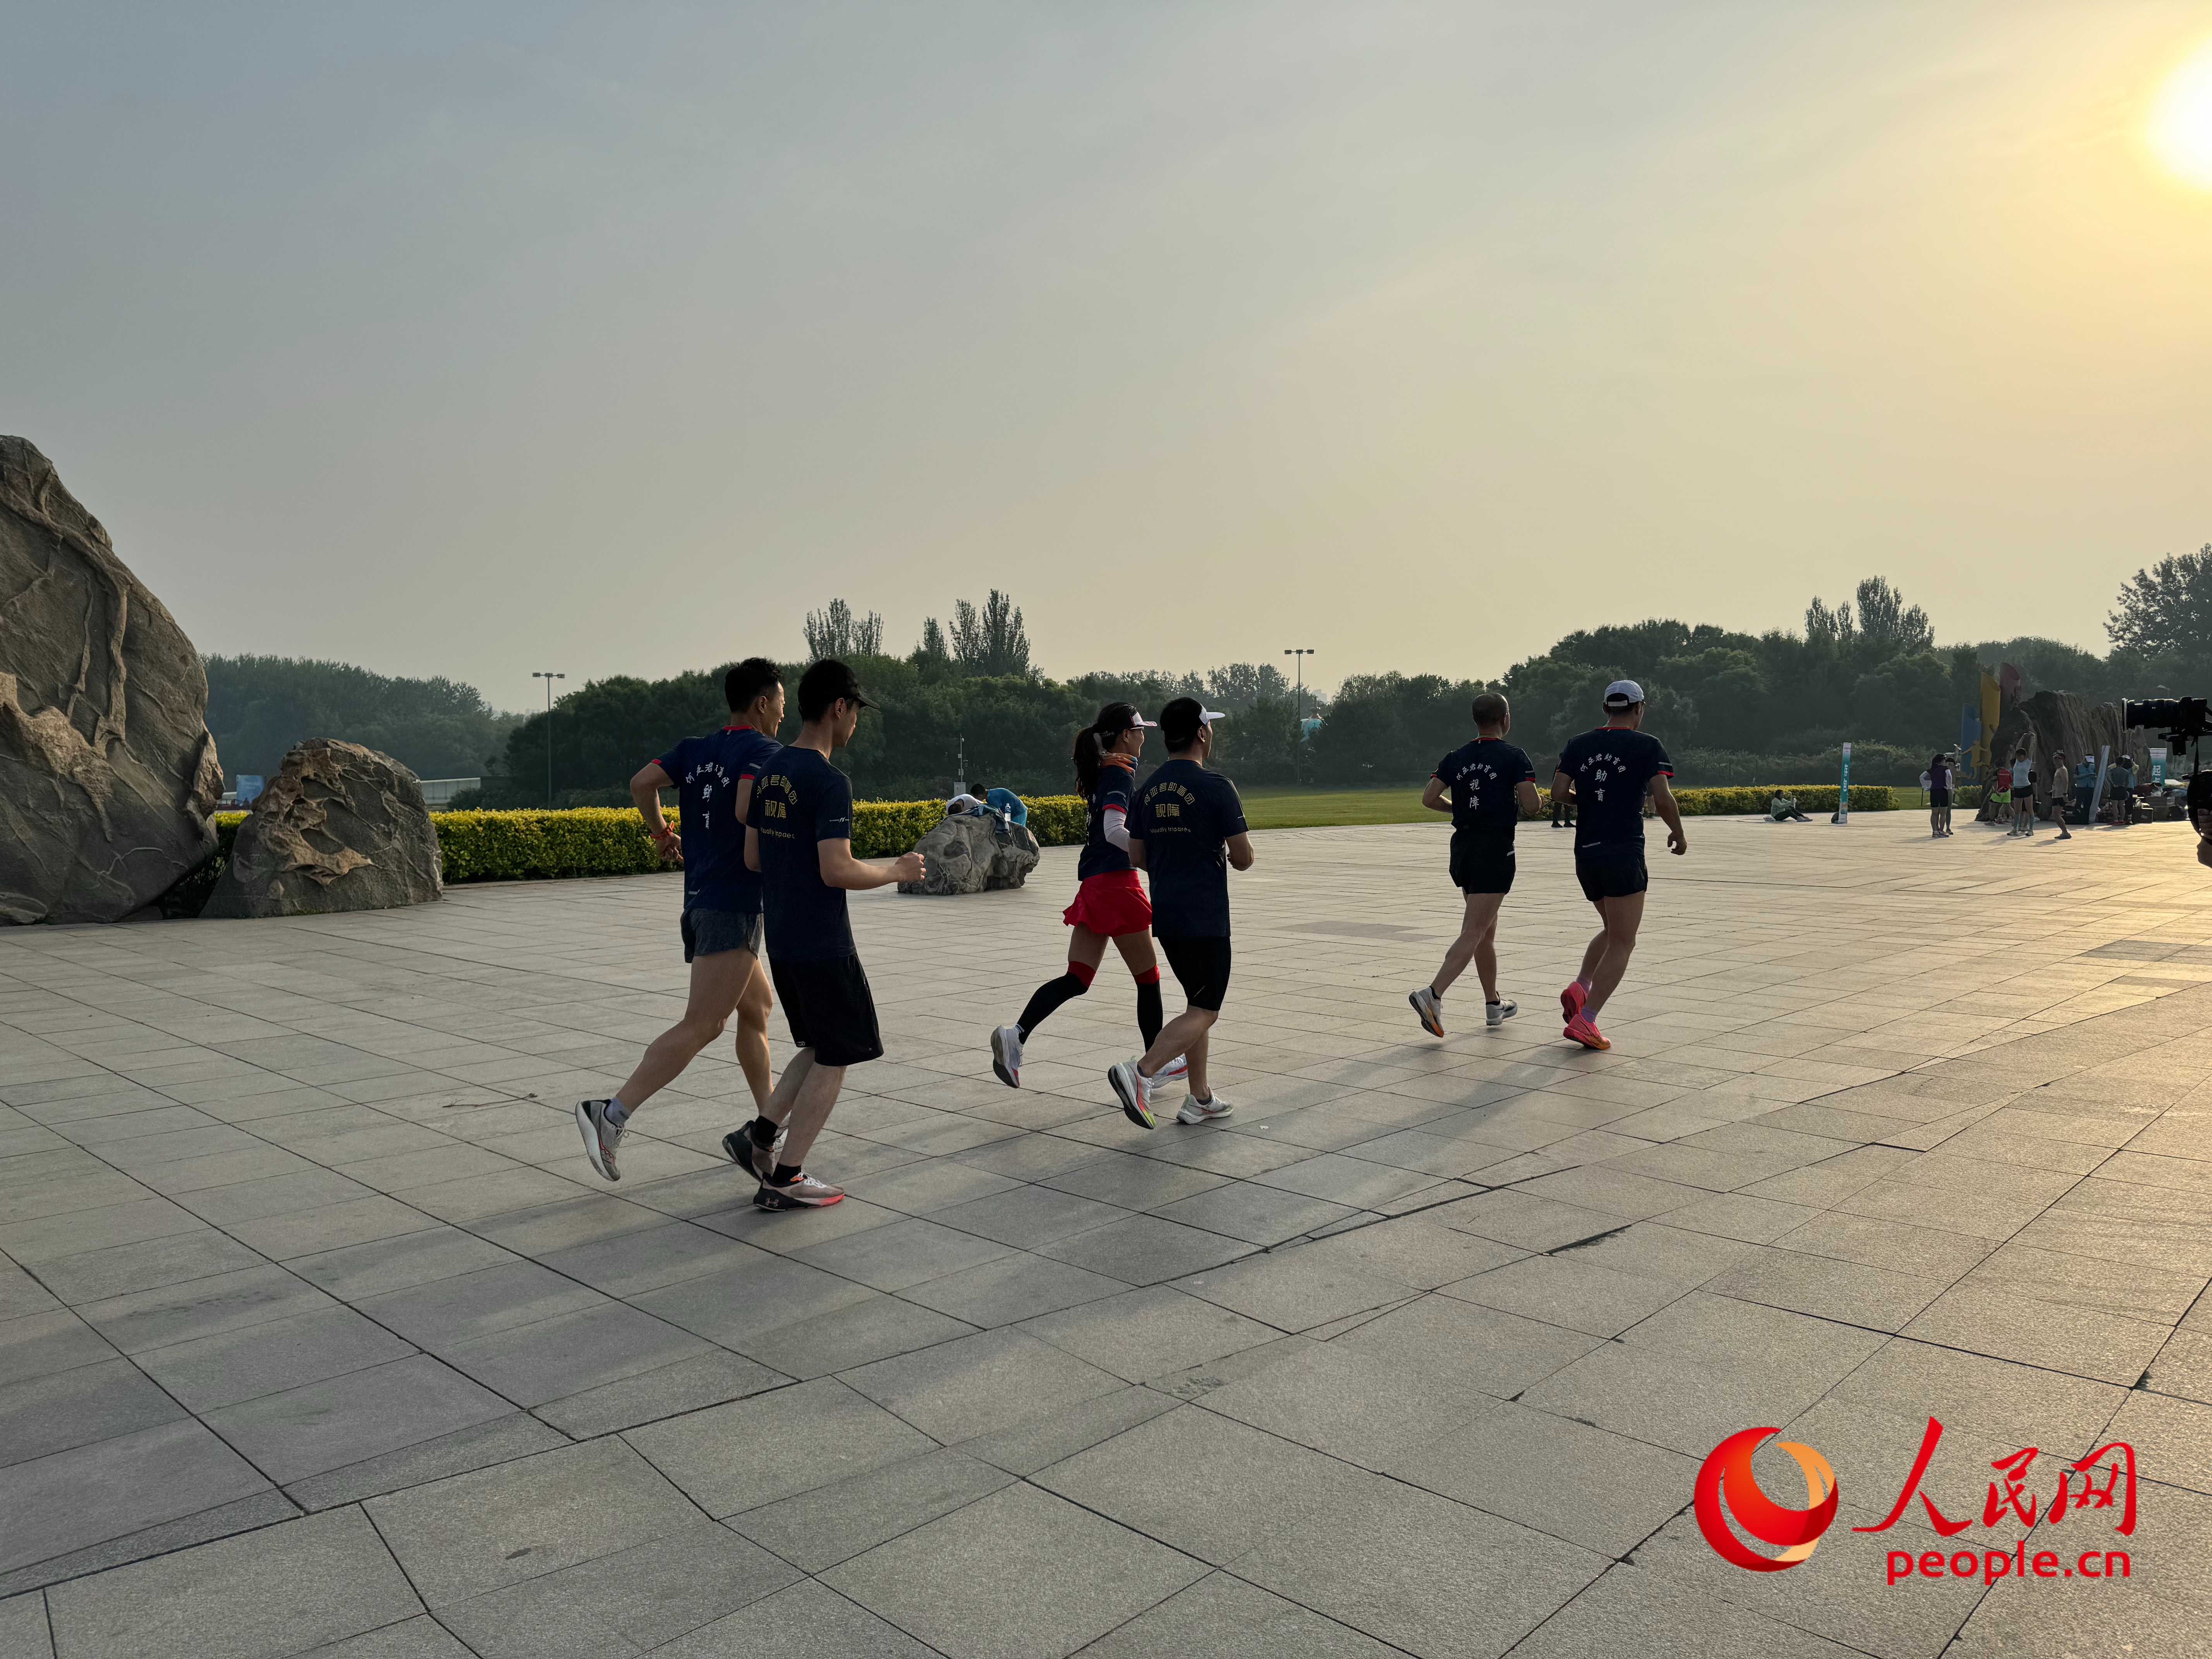  In Beijing Olympic Forest Park, the blind runners run against the rising sun. Photographed by Zhou Jingyuan on People's Daily Online